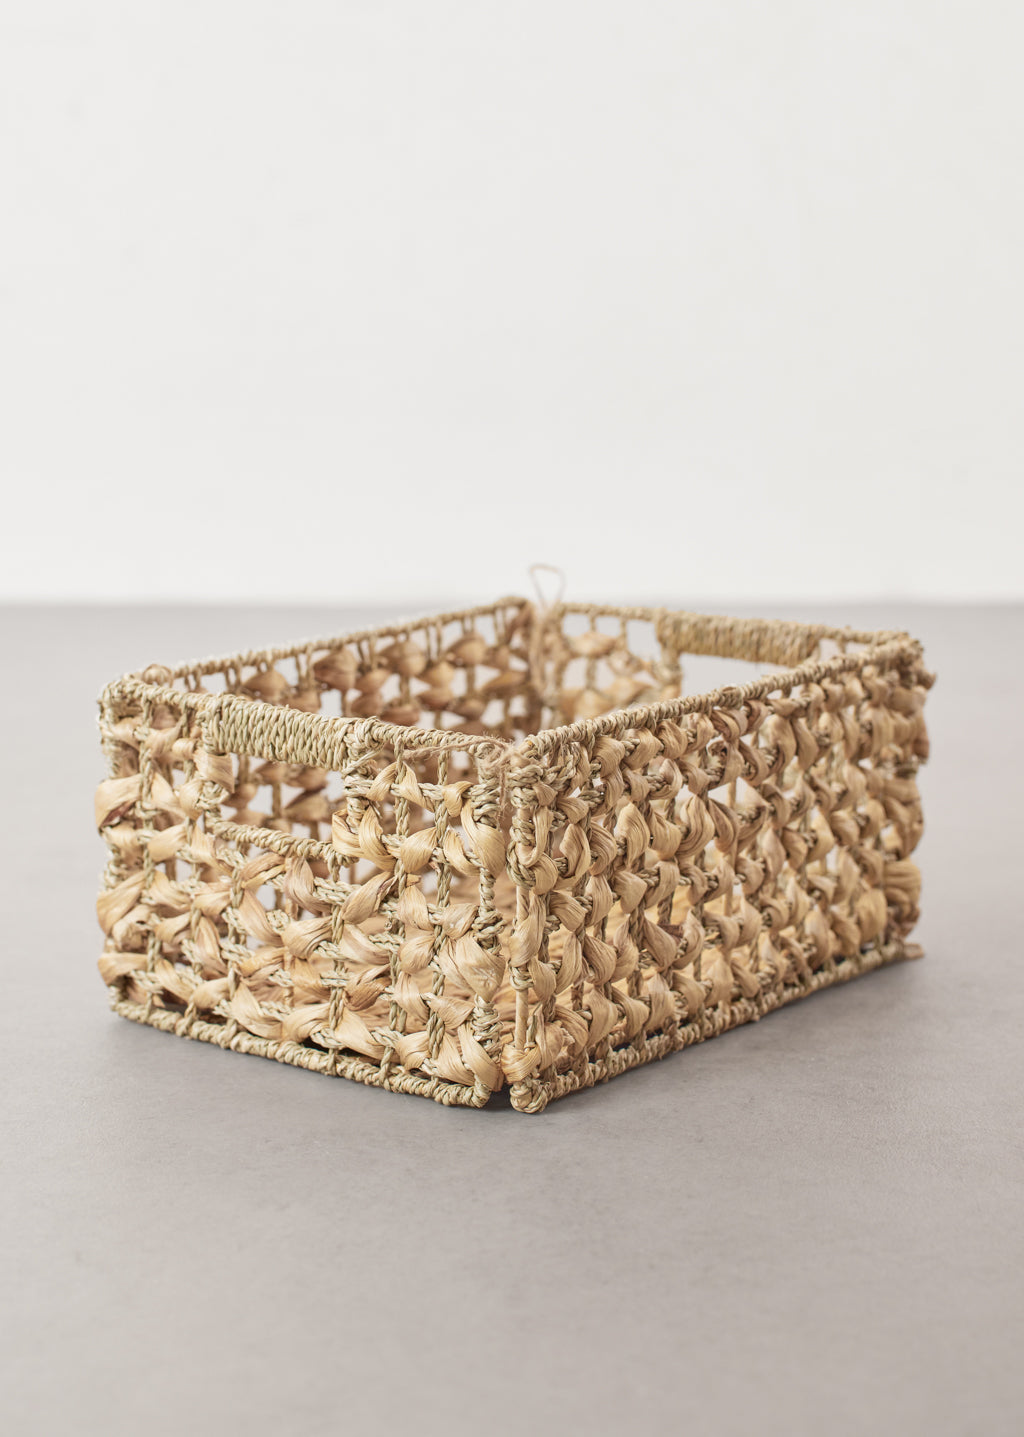 Seagrass Foldable Basket